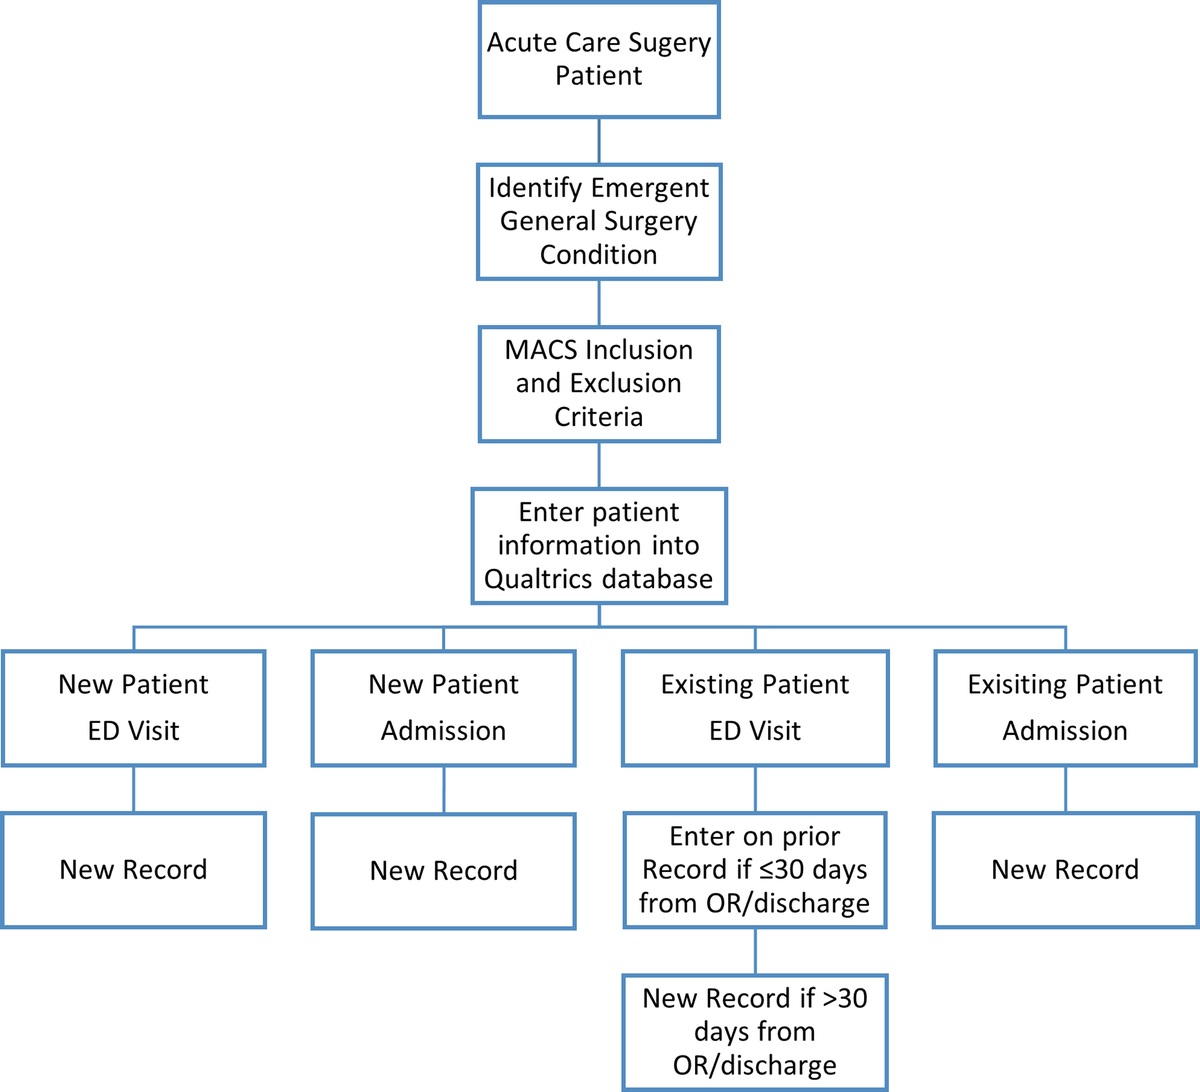 Improving outcomes in emergency general surgery: Construct of a collaborative quality initiative